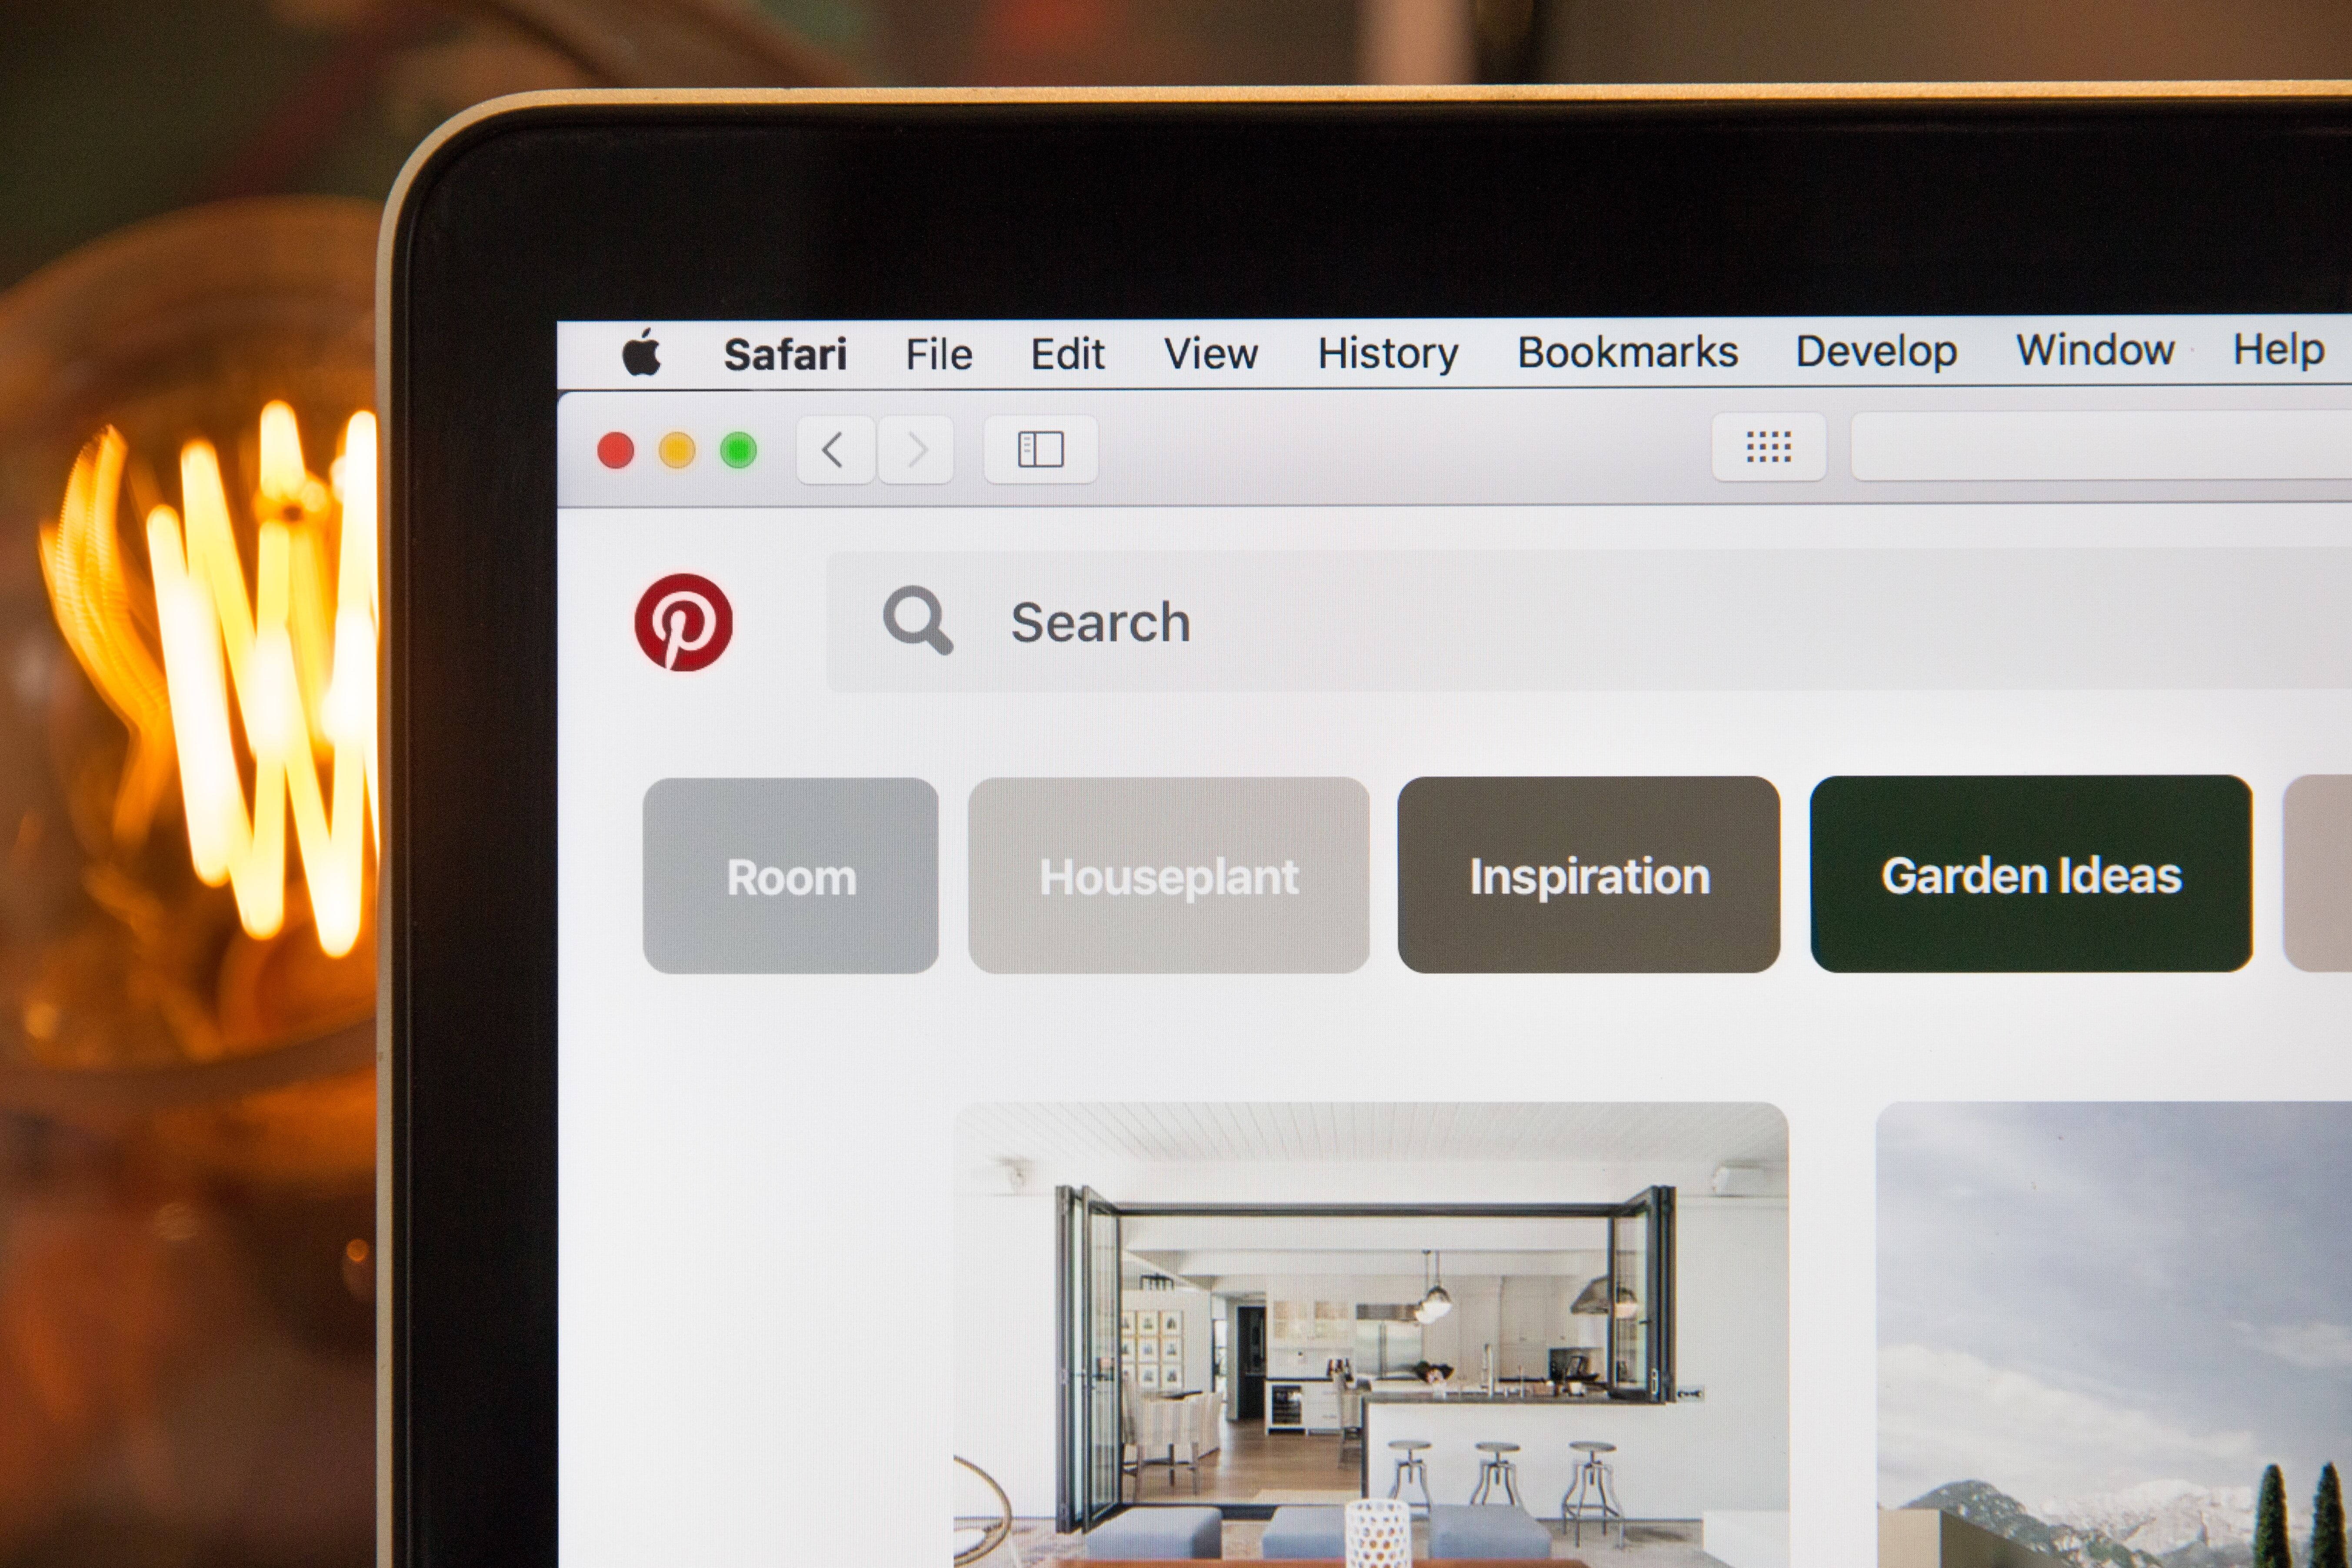 Does Your Business Need a Pinterest?